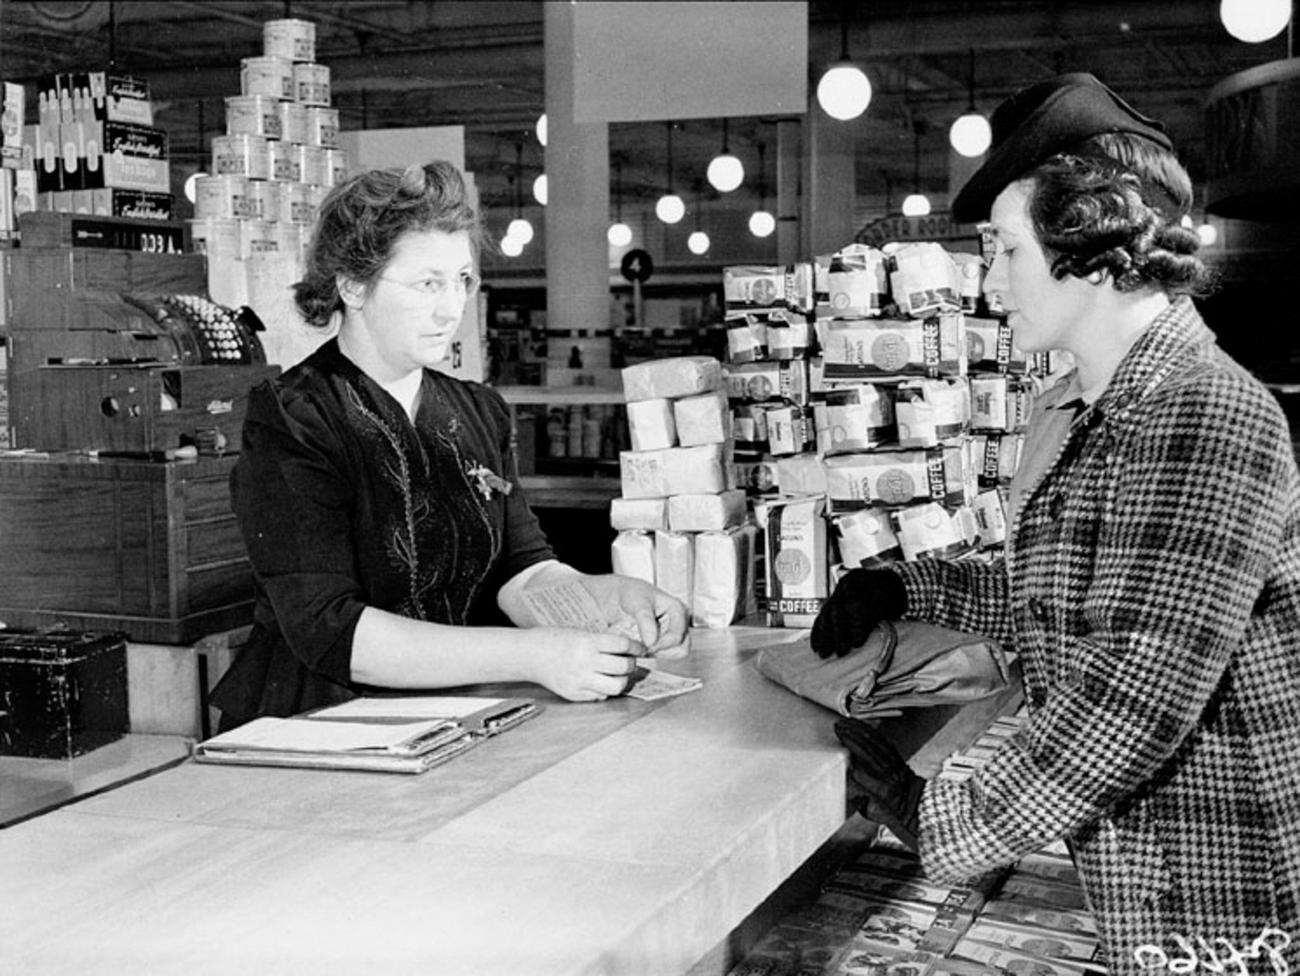 two women talk across a shop counter with piles of products behind them.